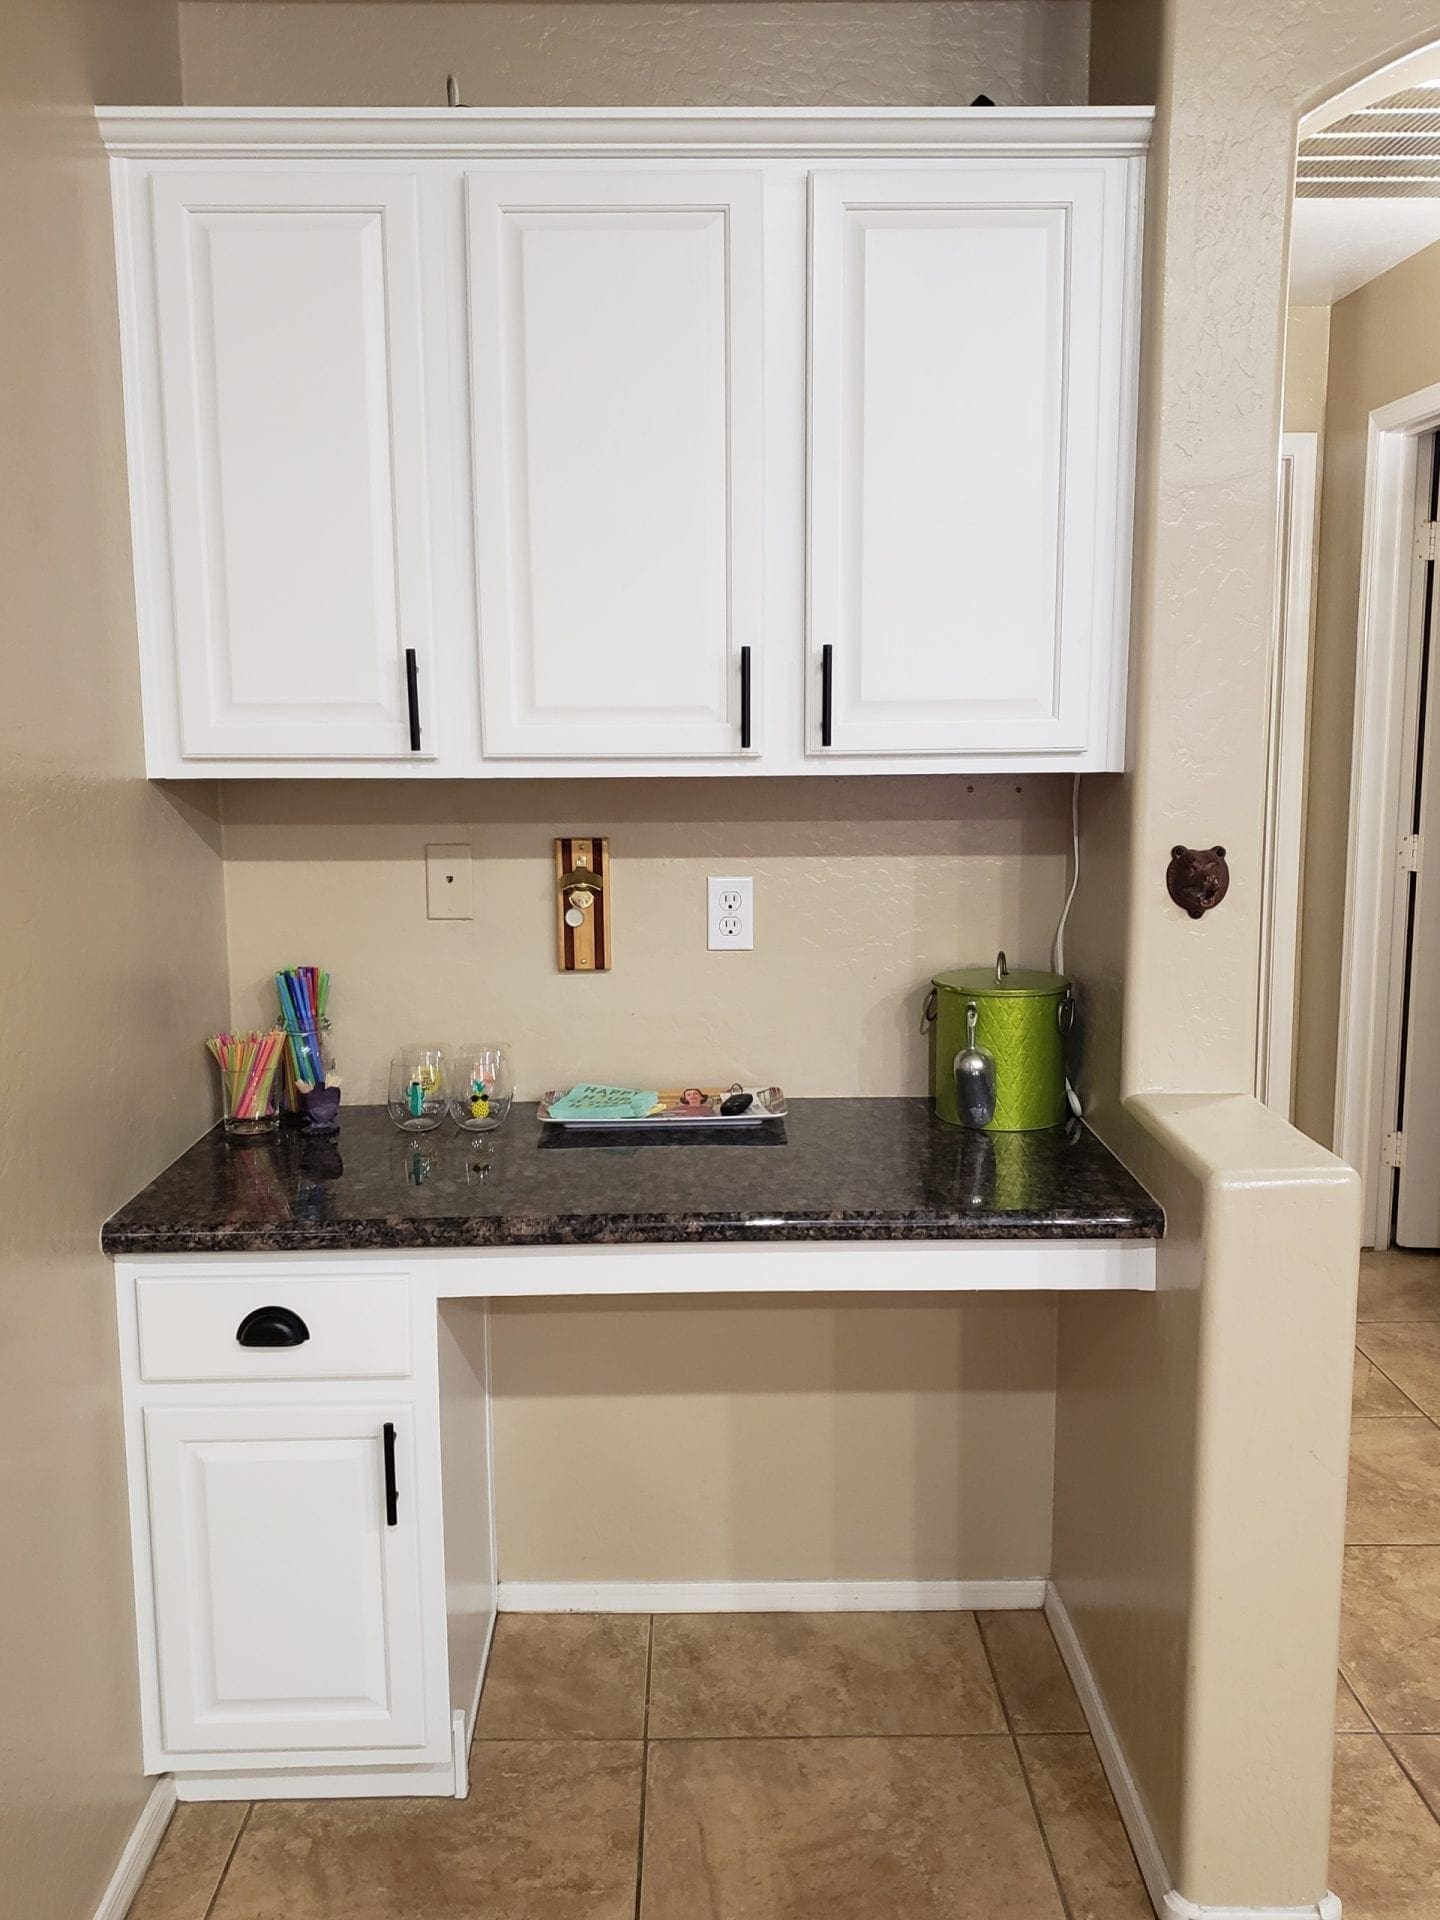 Arizona Painting Company offers Cabinet Painting: Newly painted cabinets bring a fresh and stylish transformation to any space. White Cabinets.